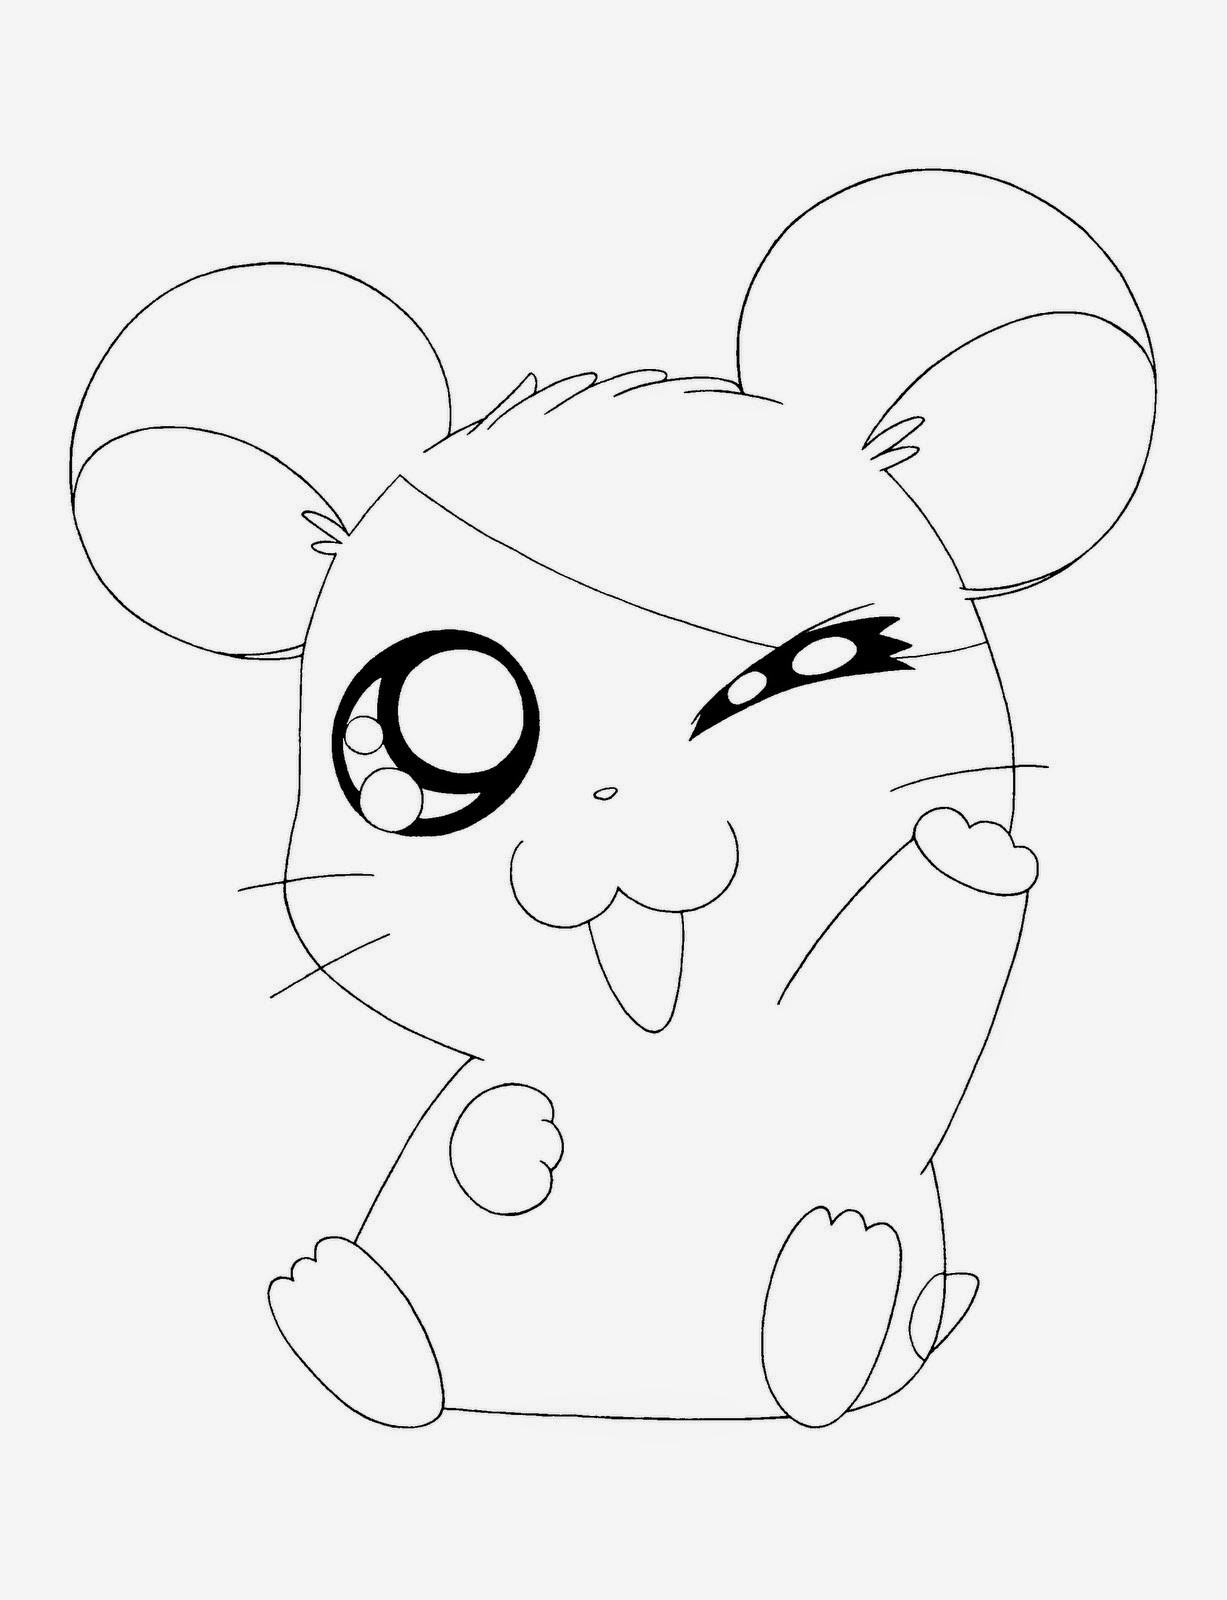 Basic Coloring Pages For Girls
 Coloring Pages Cute and Easy Coloring Pages Free and